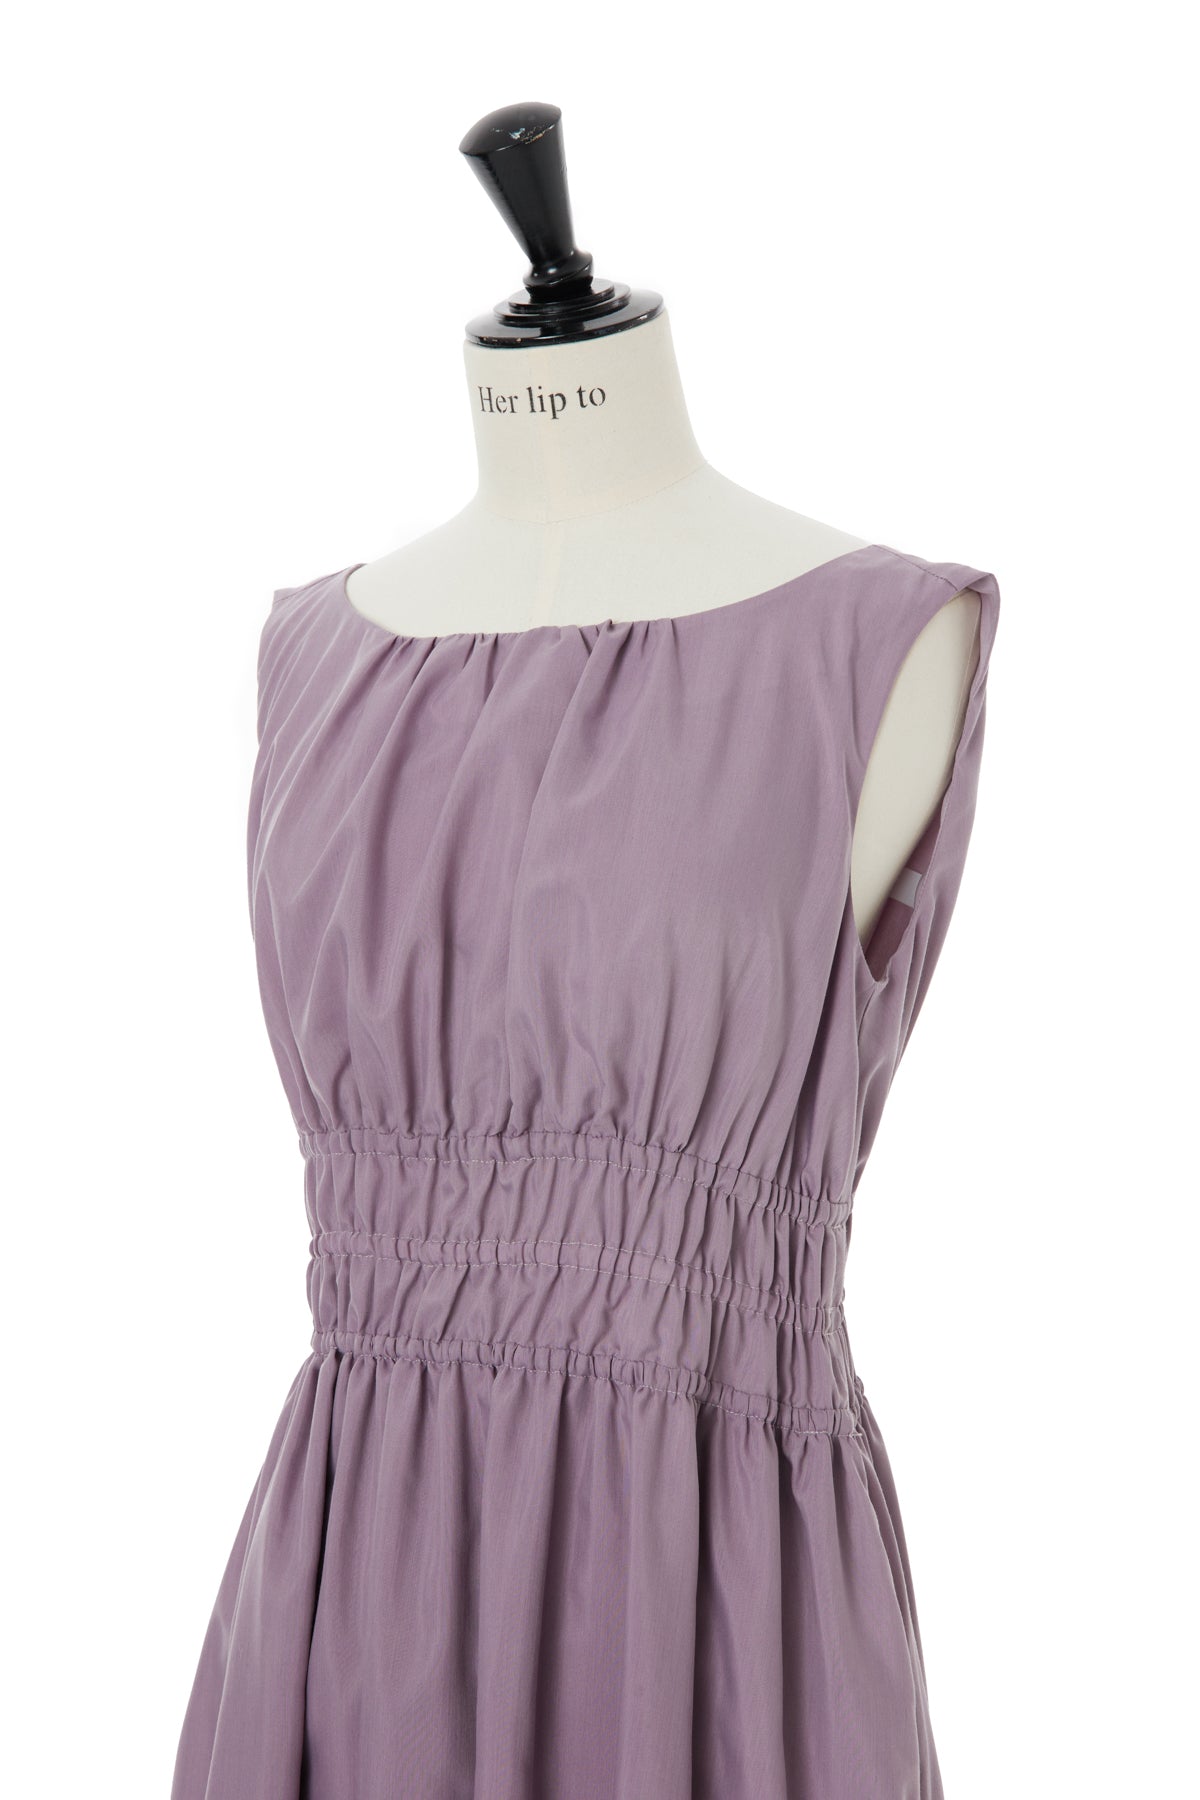 Riviera Double Bow Dress / her lip to